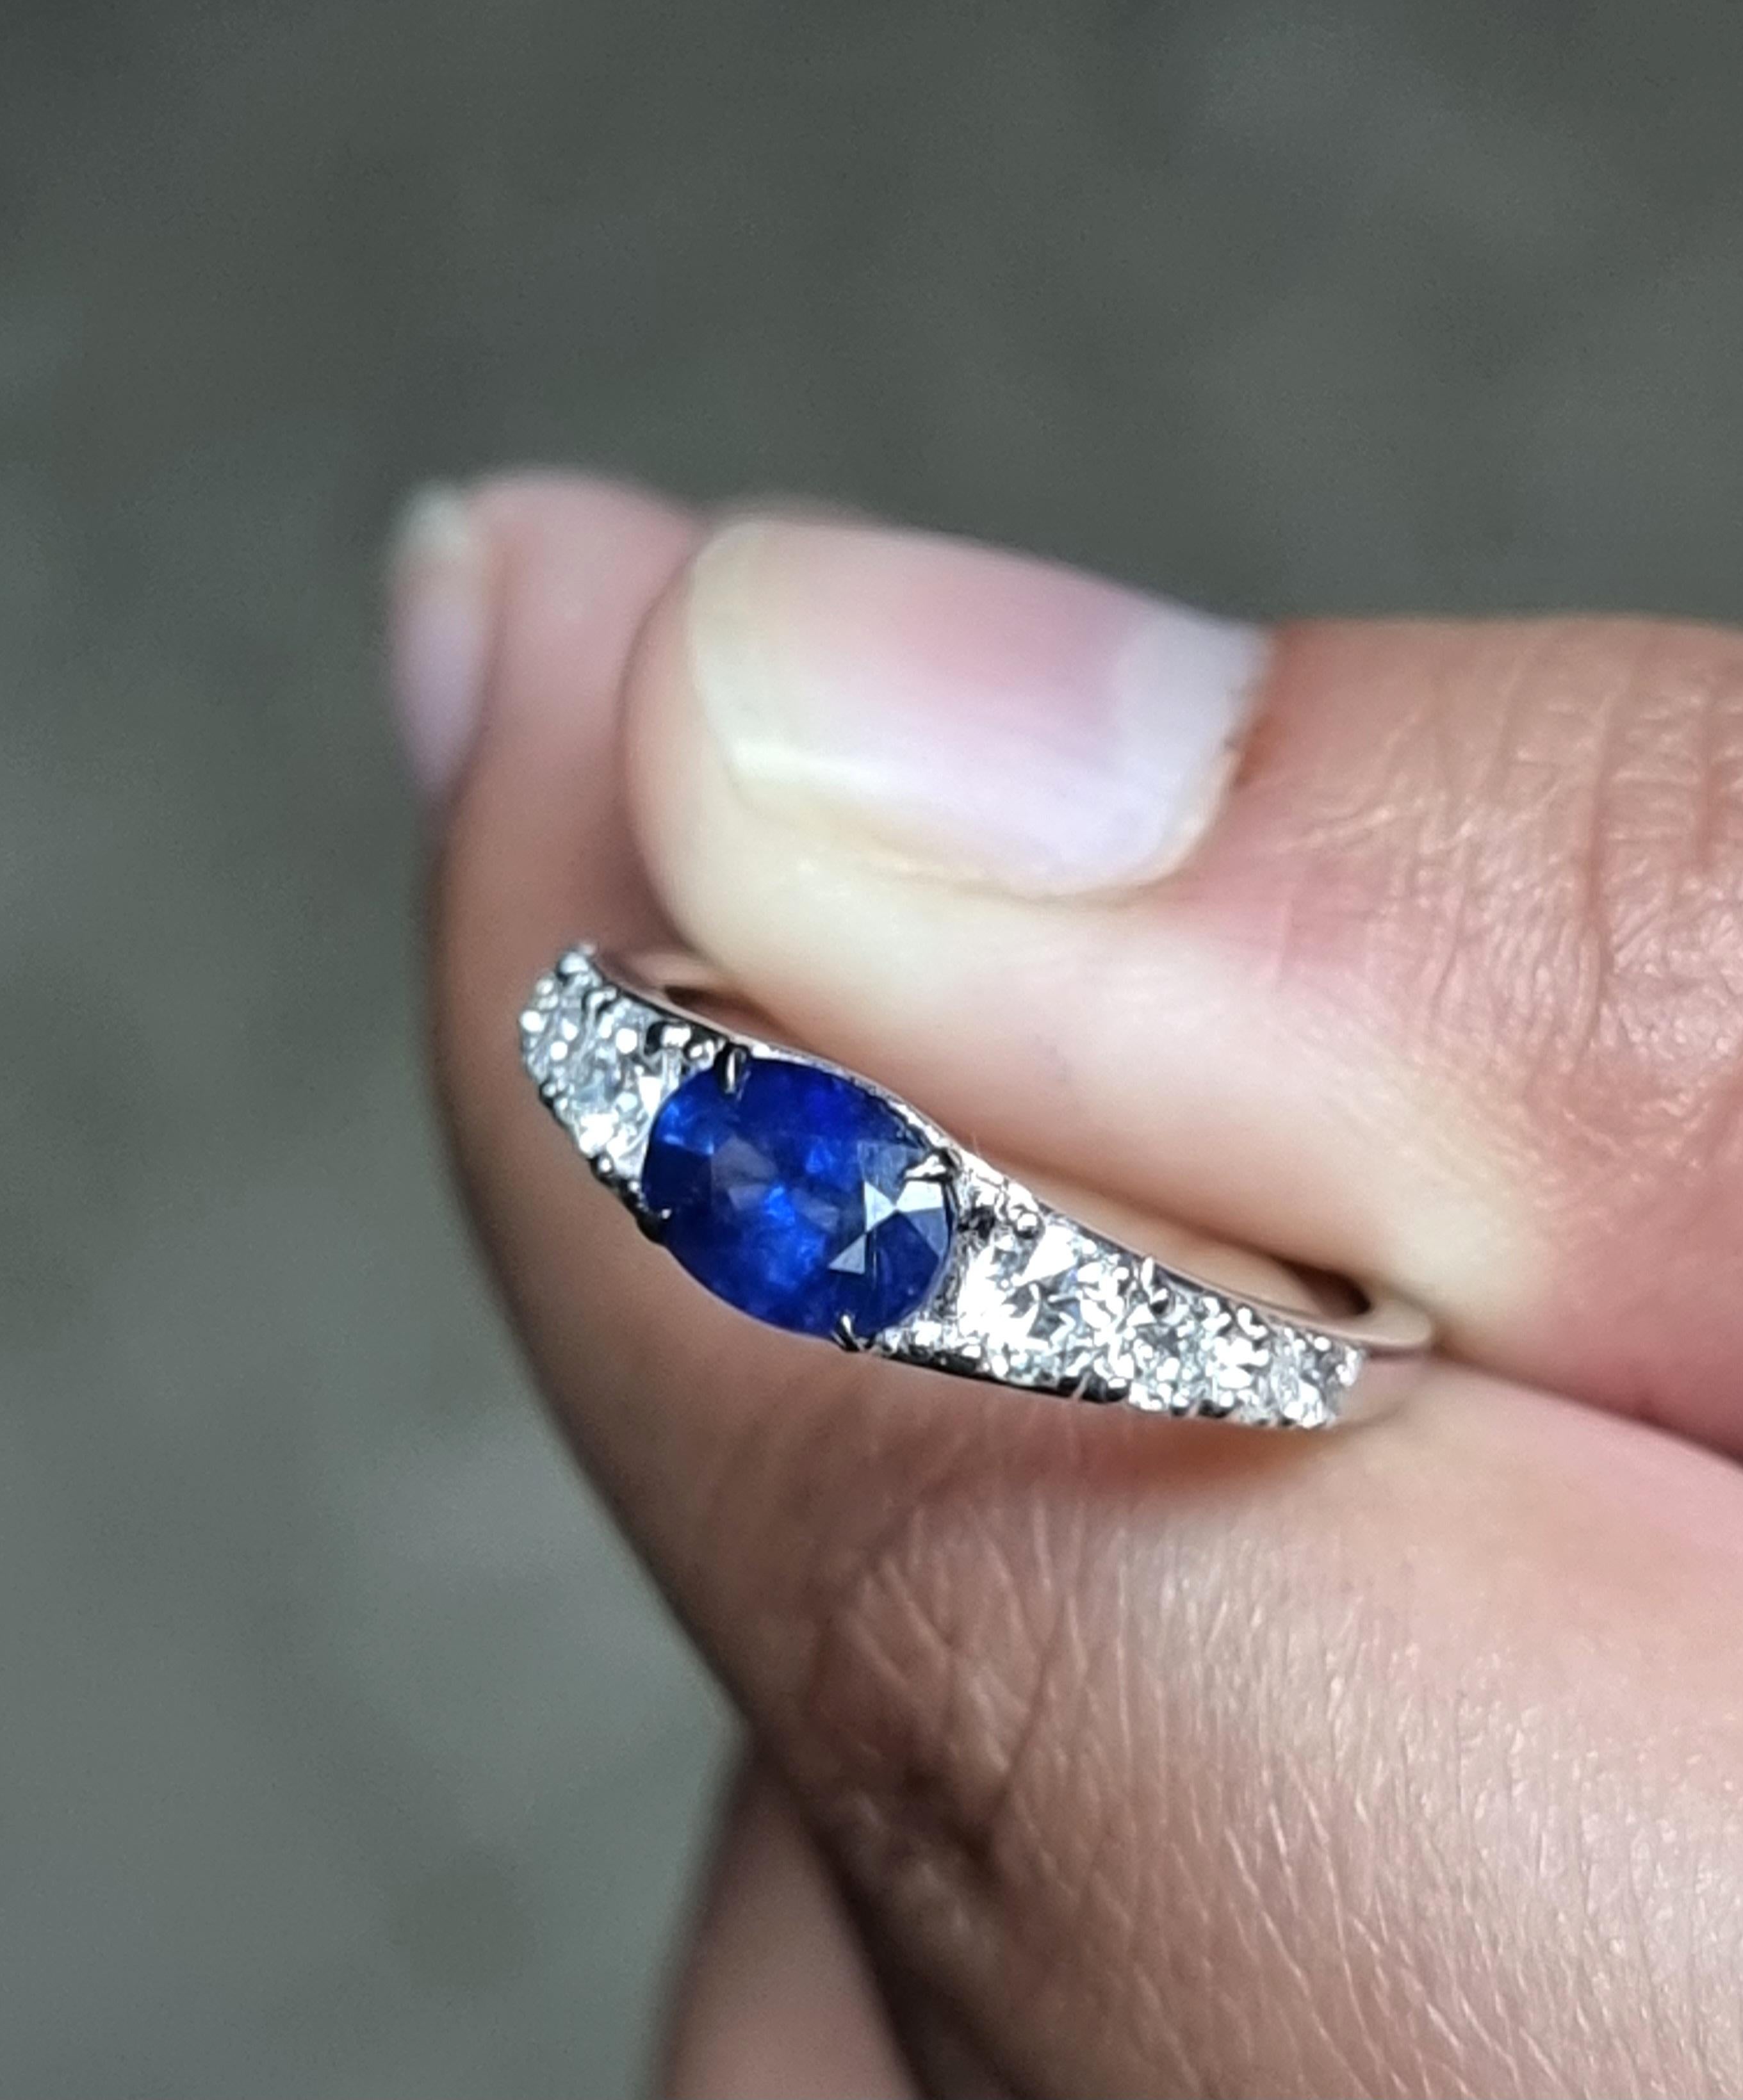 Oval Cut 1.24 cts Sapphire Ring set along with old mine cut diamonds For Sale